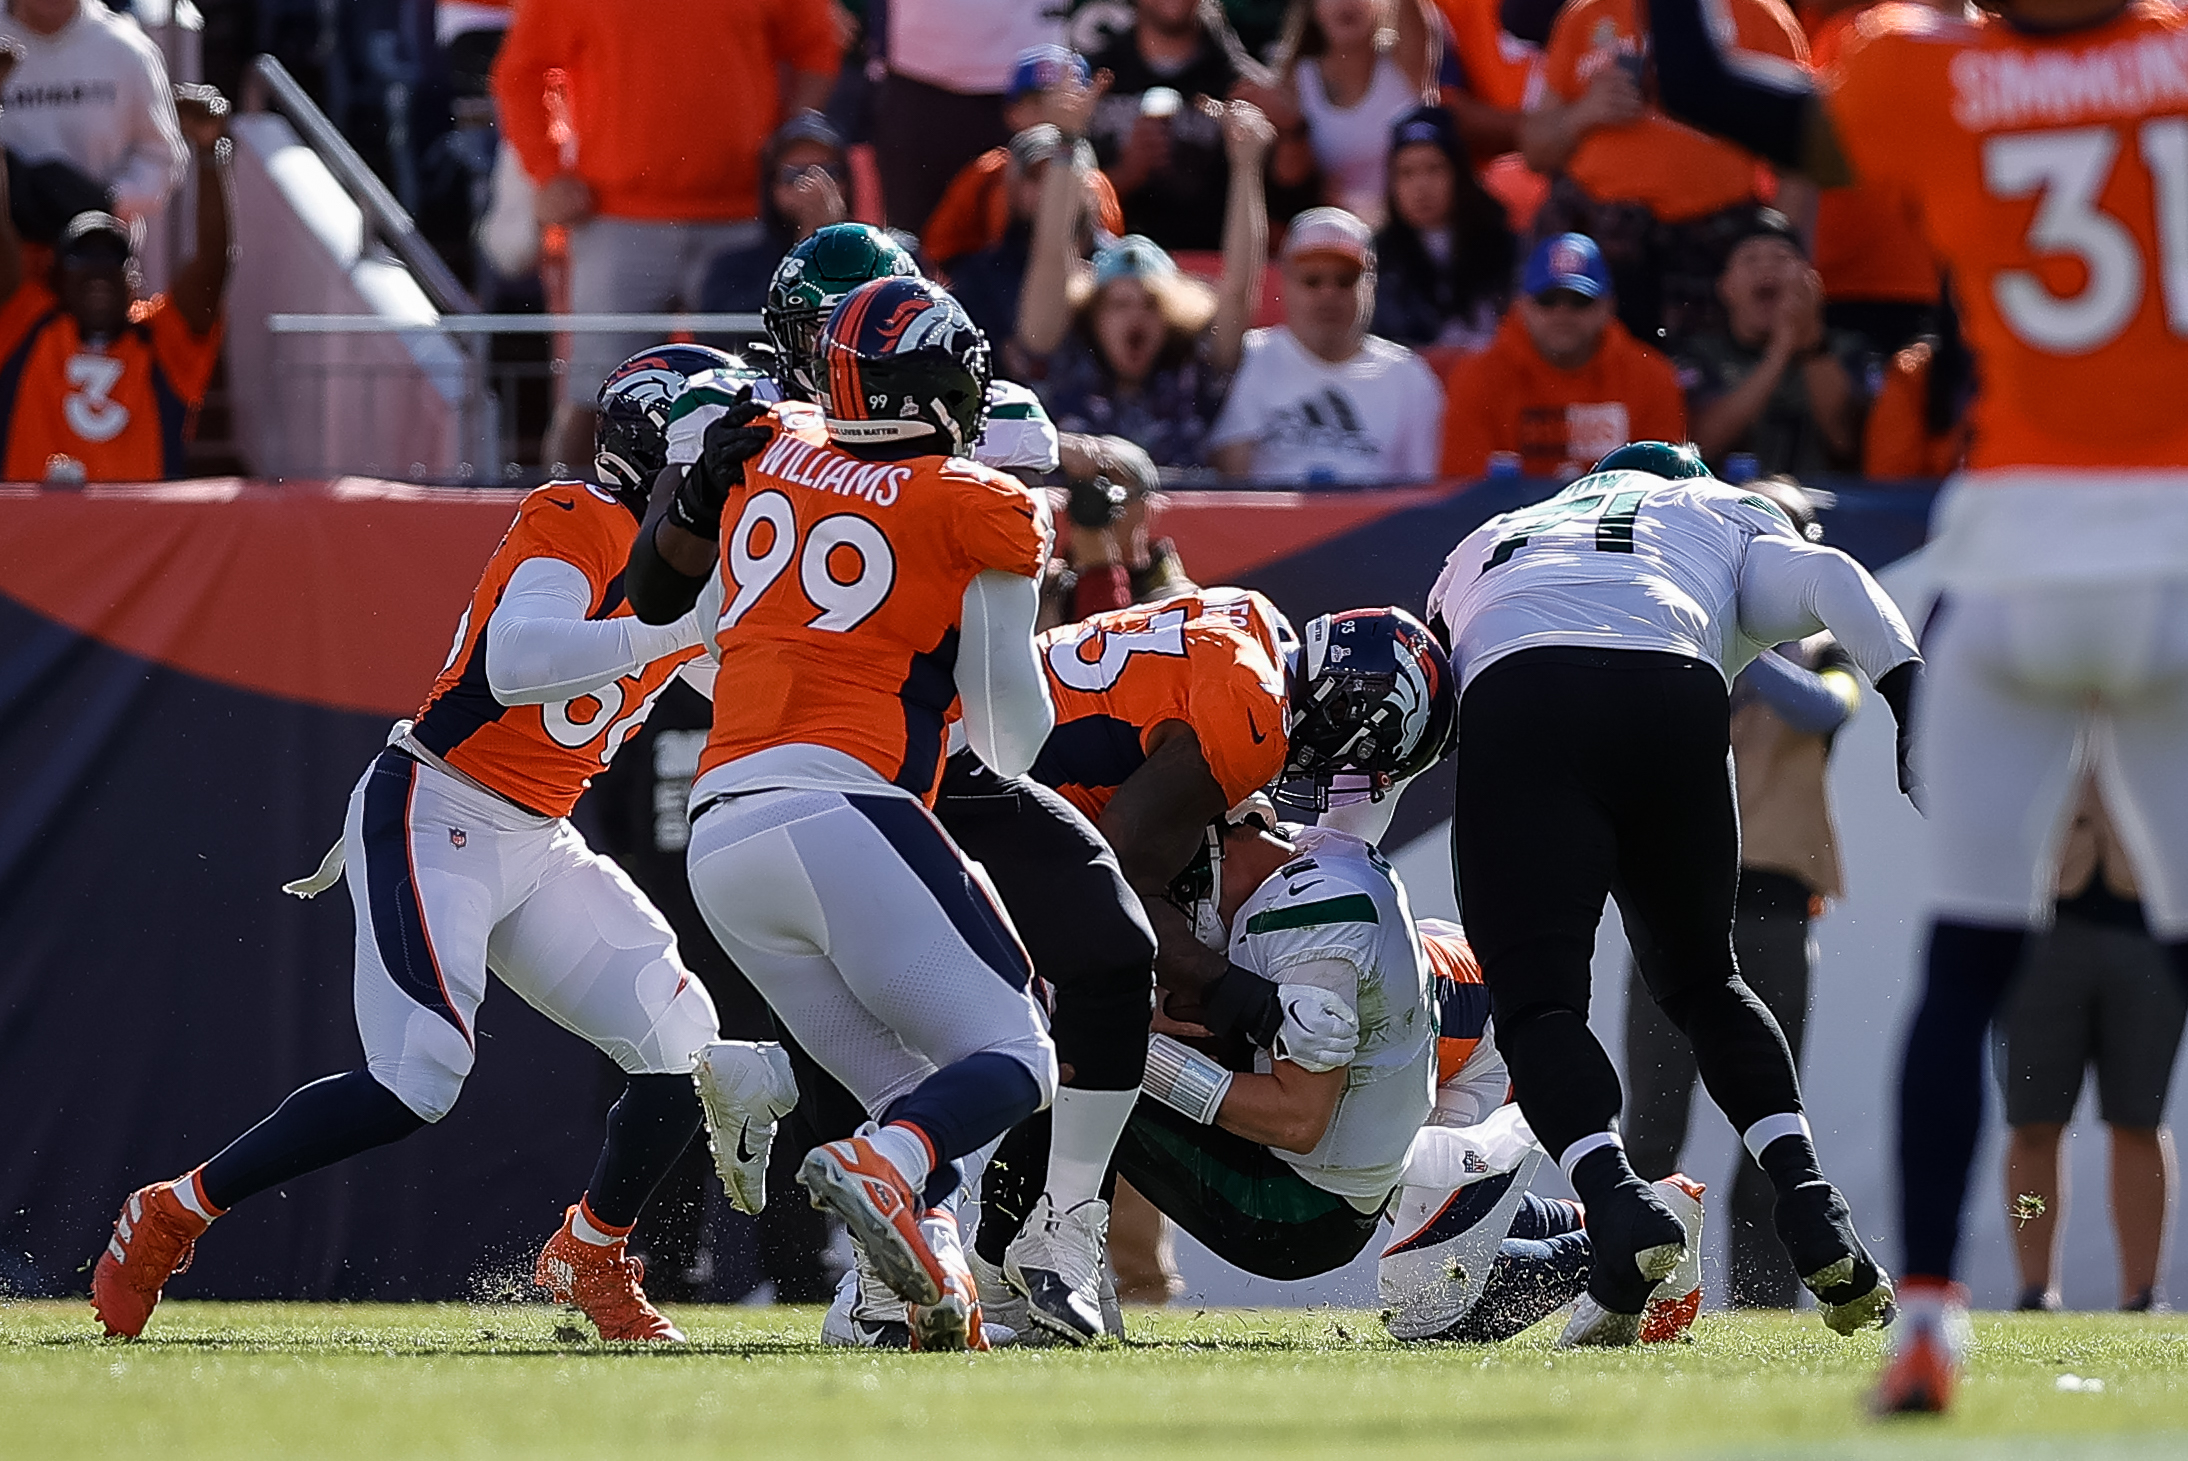 New York Jets quarterback Zach Wilson (2) is sacked by Denver Broncos defensive end Dre'Mont Jones (93) as defensive tackle DeShawn Williams (99) and linebacker Baron Browning (56) defend in the first quarter at Empower Field at Mile High. 